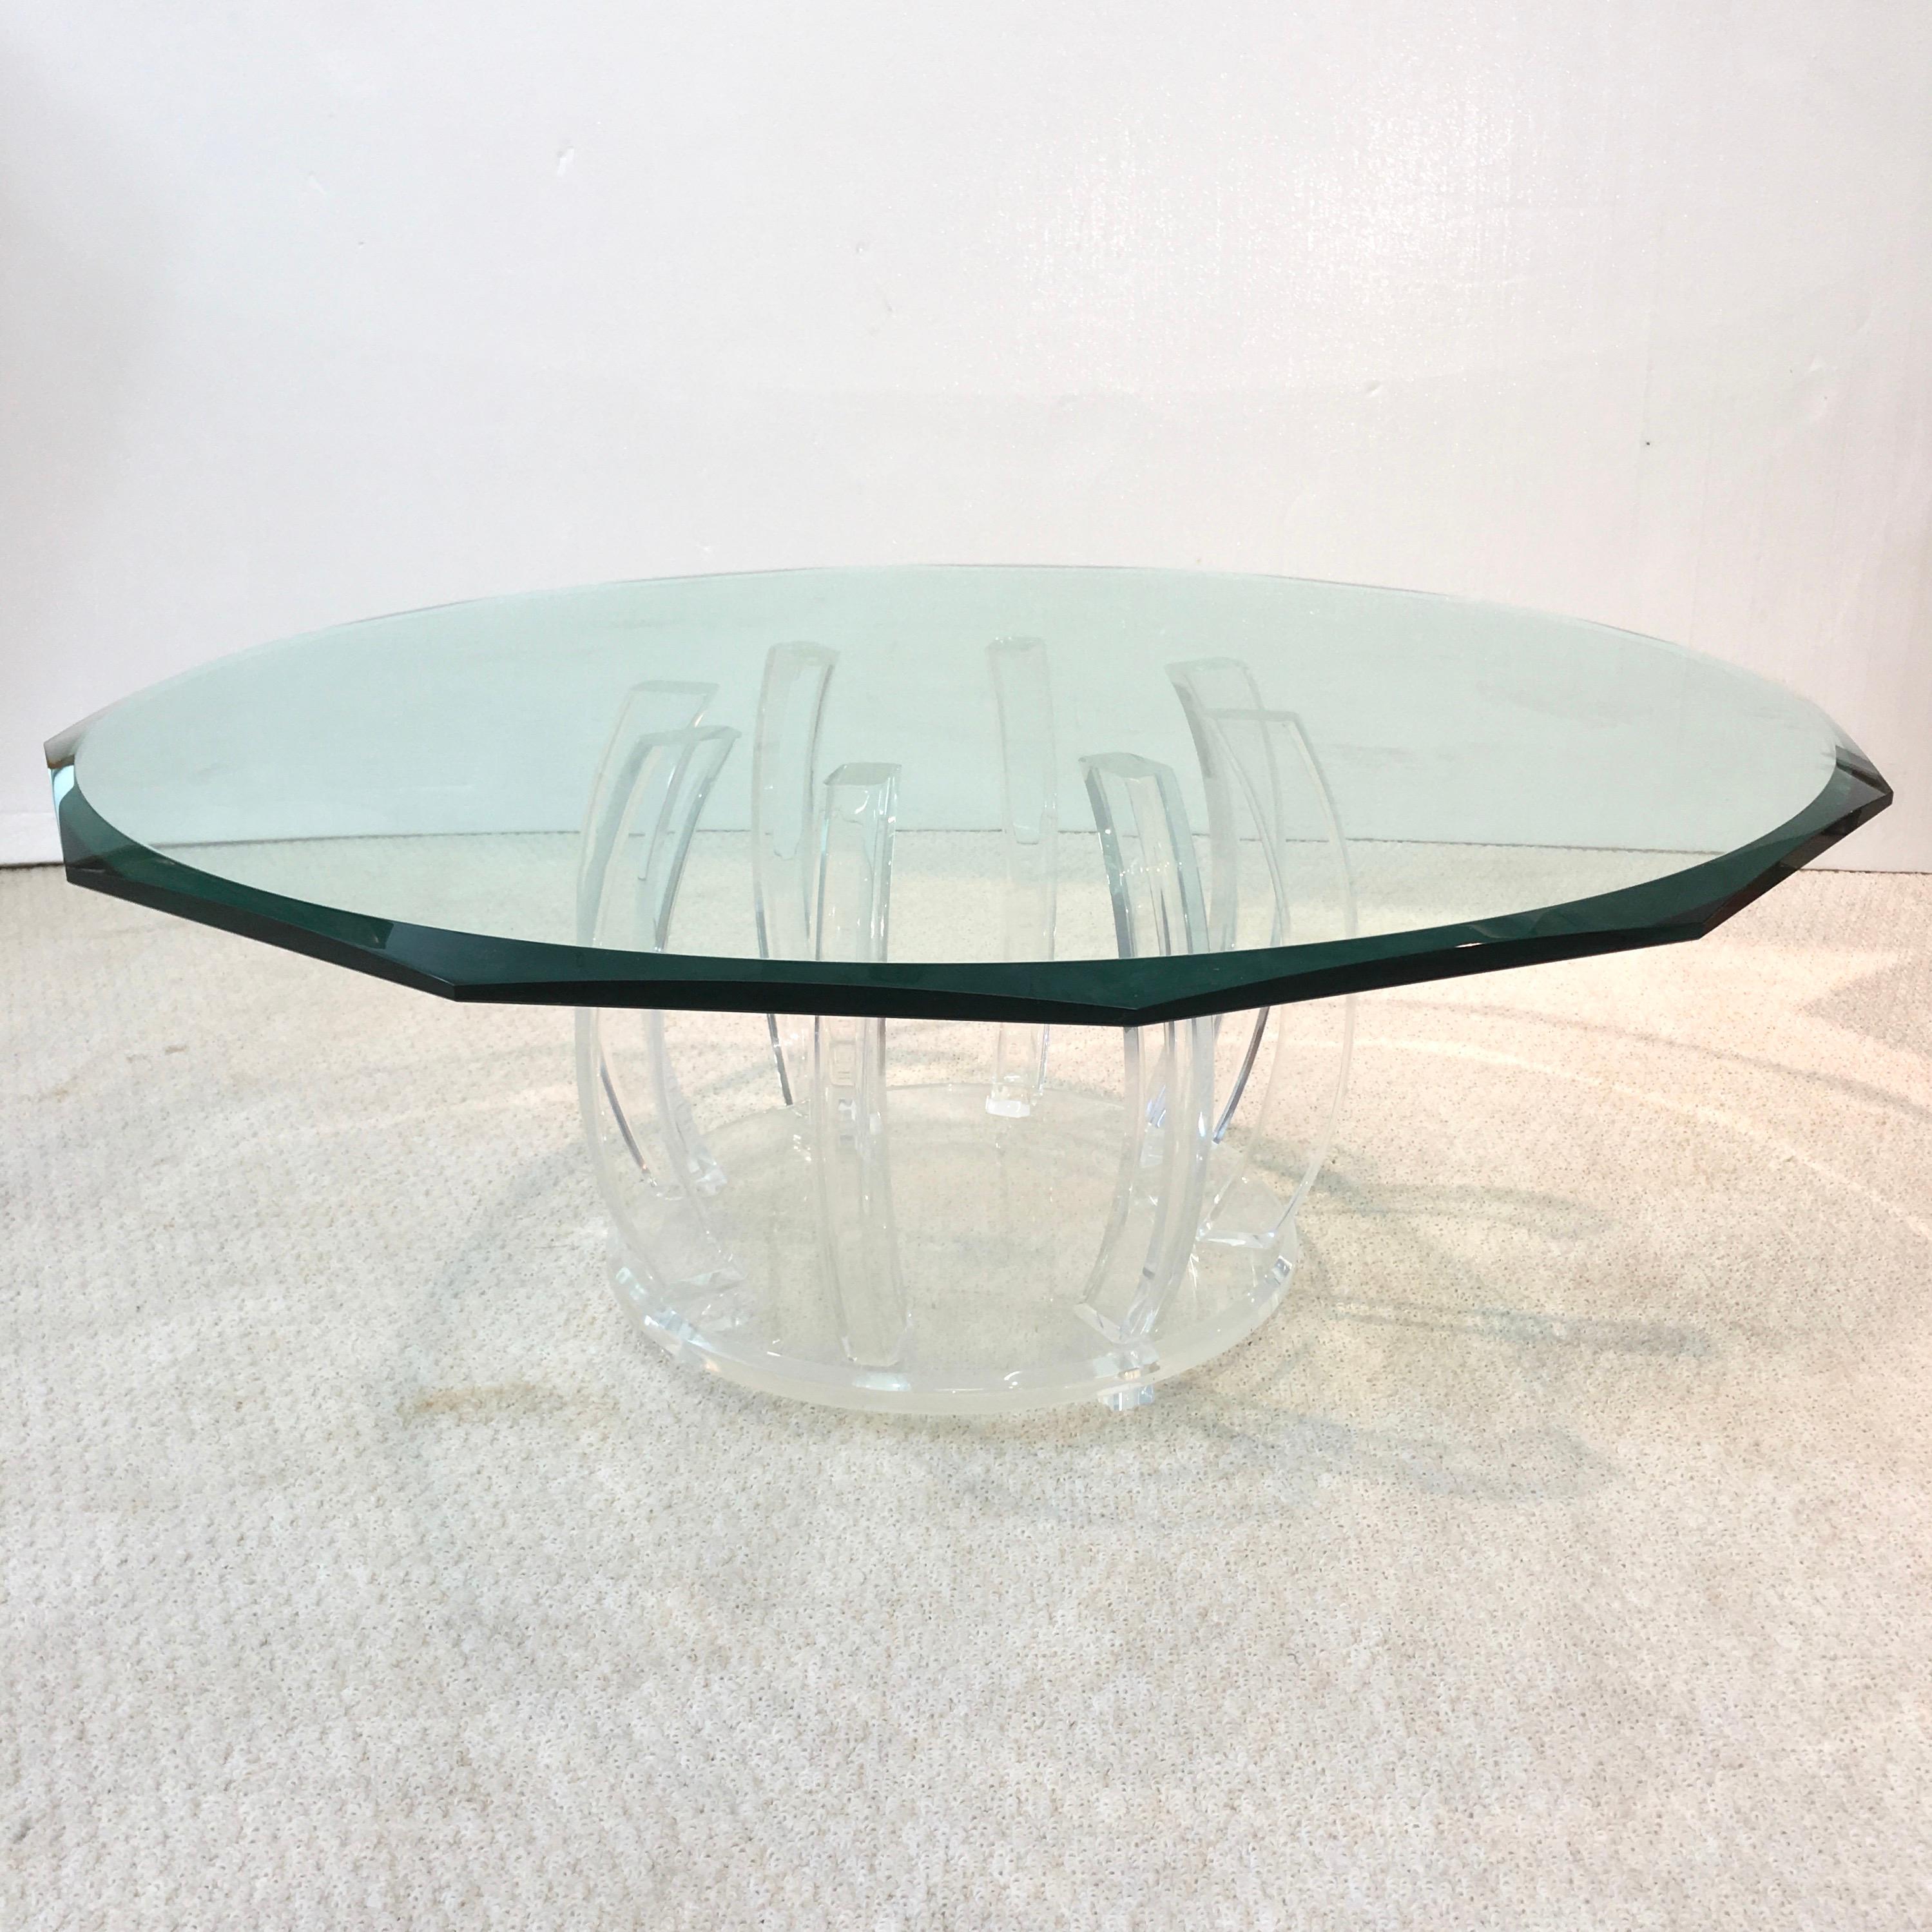 Acrylic barrel shaped cocktail table with eight ribs on a round Lucite base on four block feet supporting a stunning 1/2 inch thick twelve sided beveled glass top. 40.5 inch diameter by 15.5 inch height. Lucite cage drum base is 20.5 inches diameter